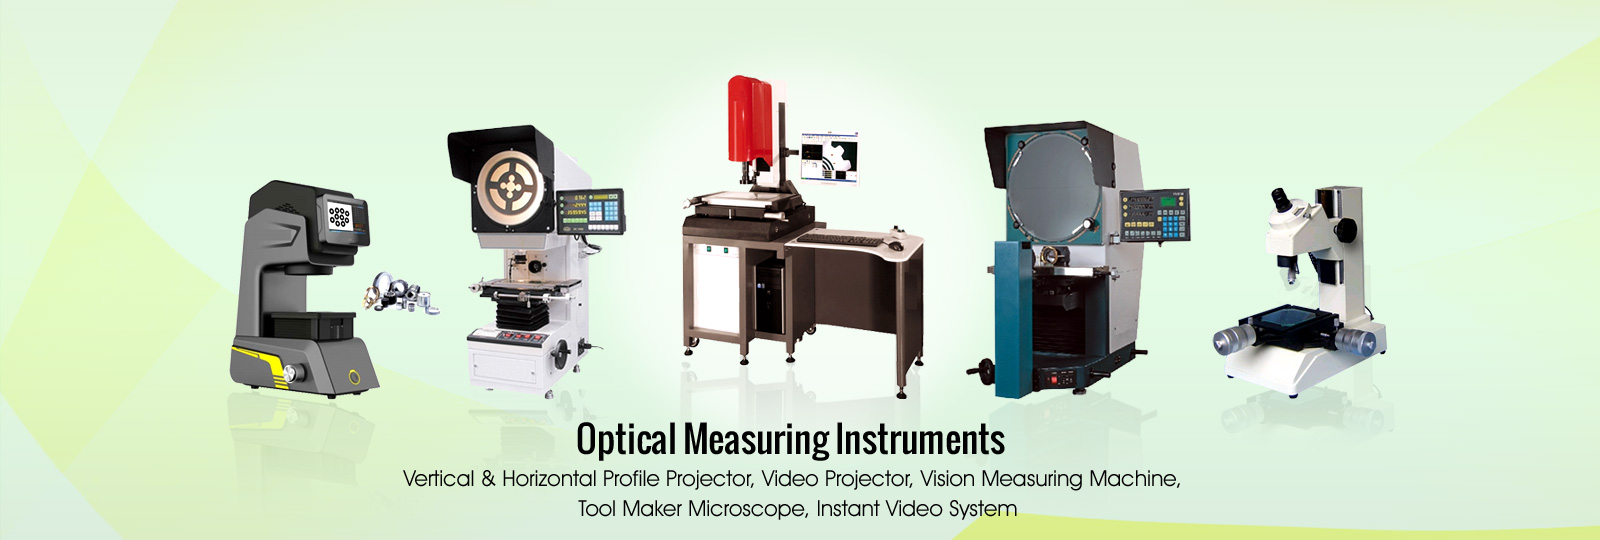 Optical Measuring Instruments